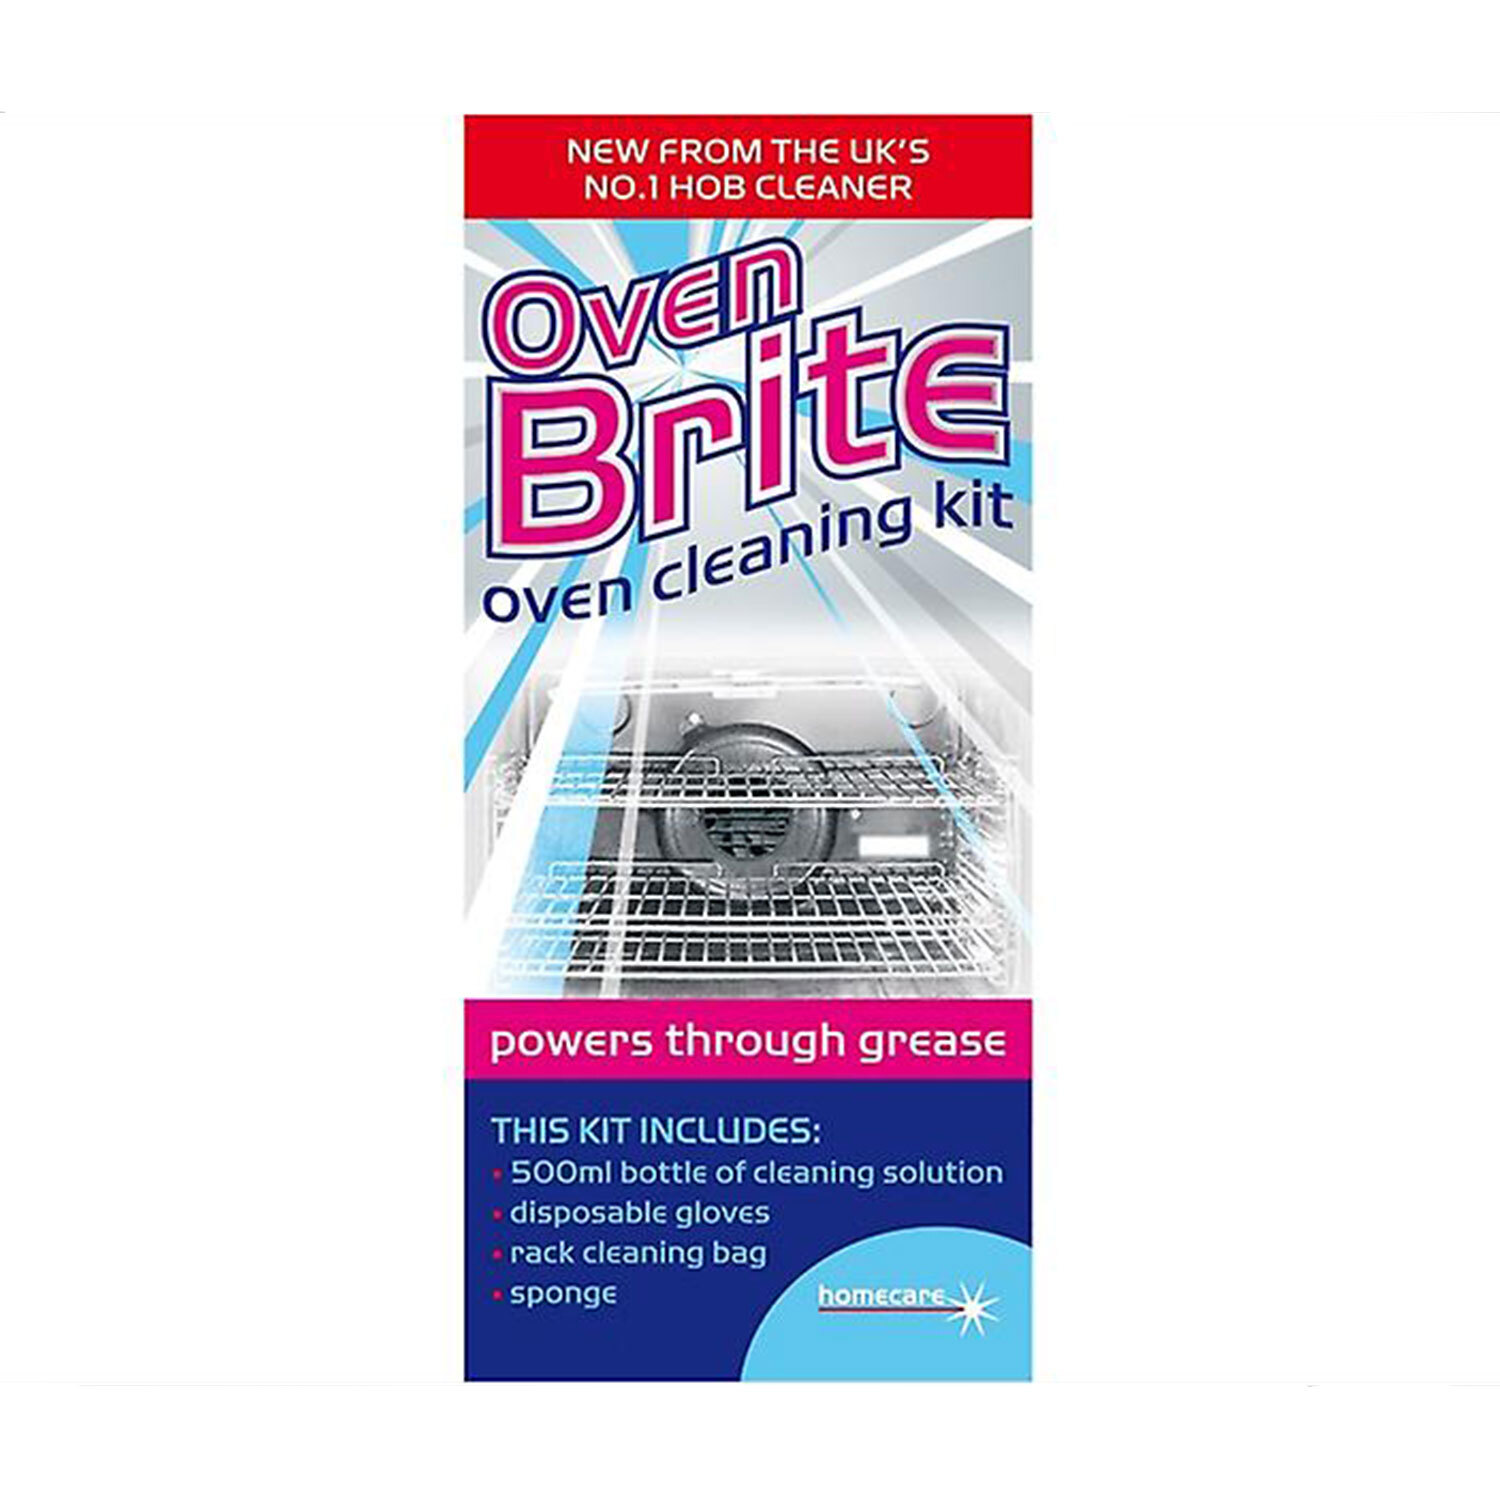 Oven Brite Oven Cleaning Set Image